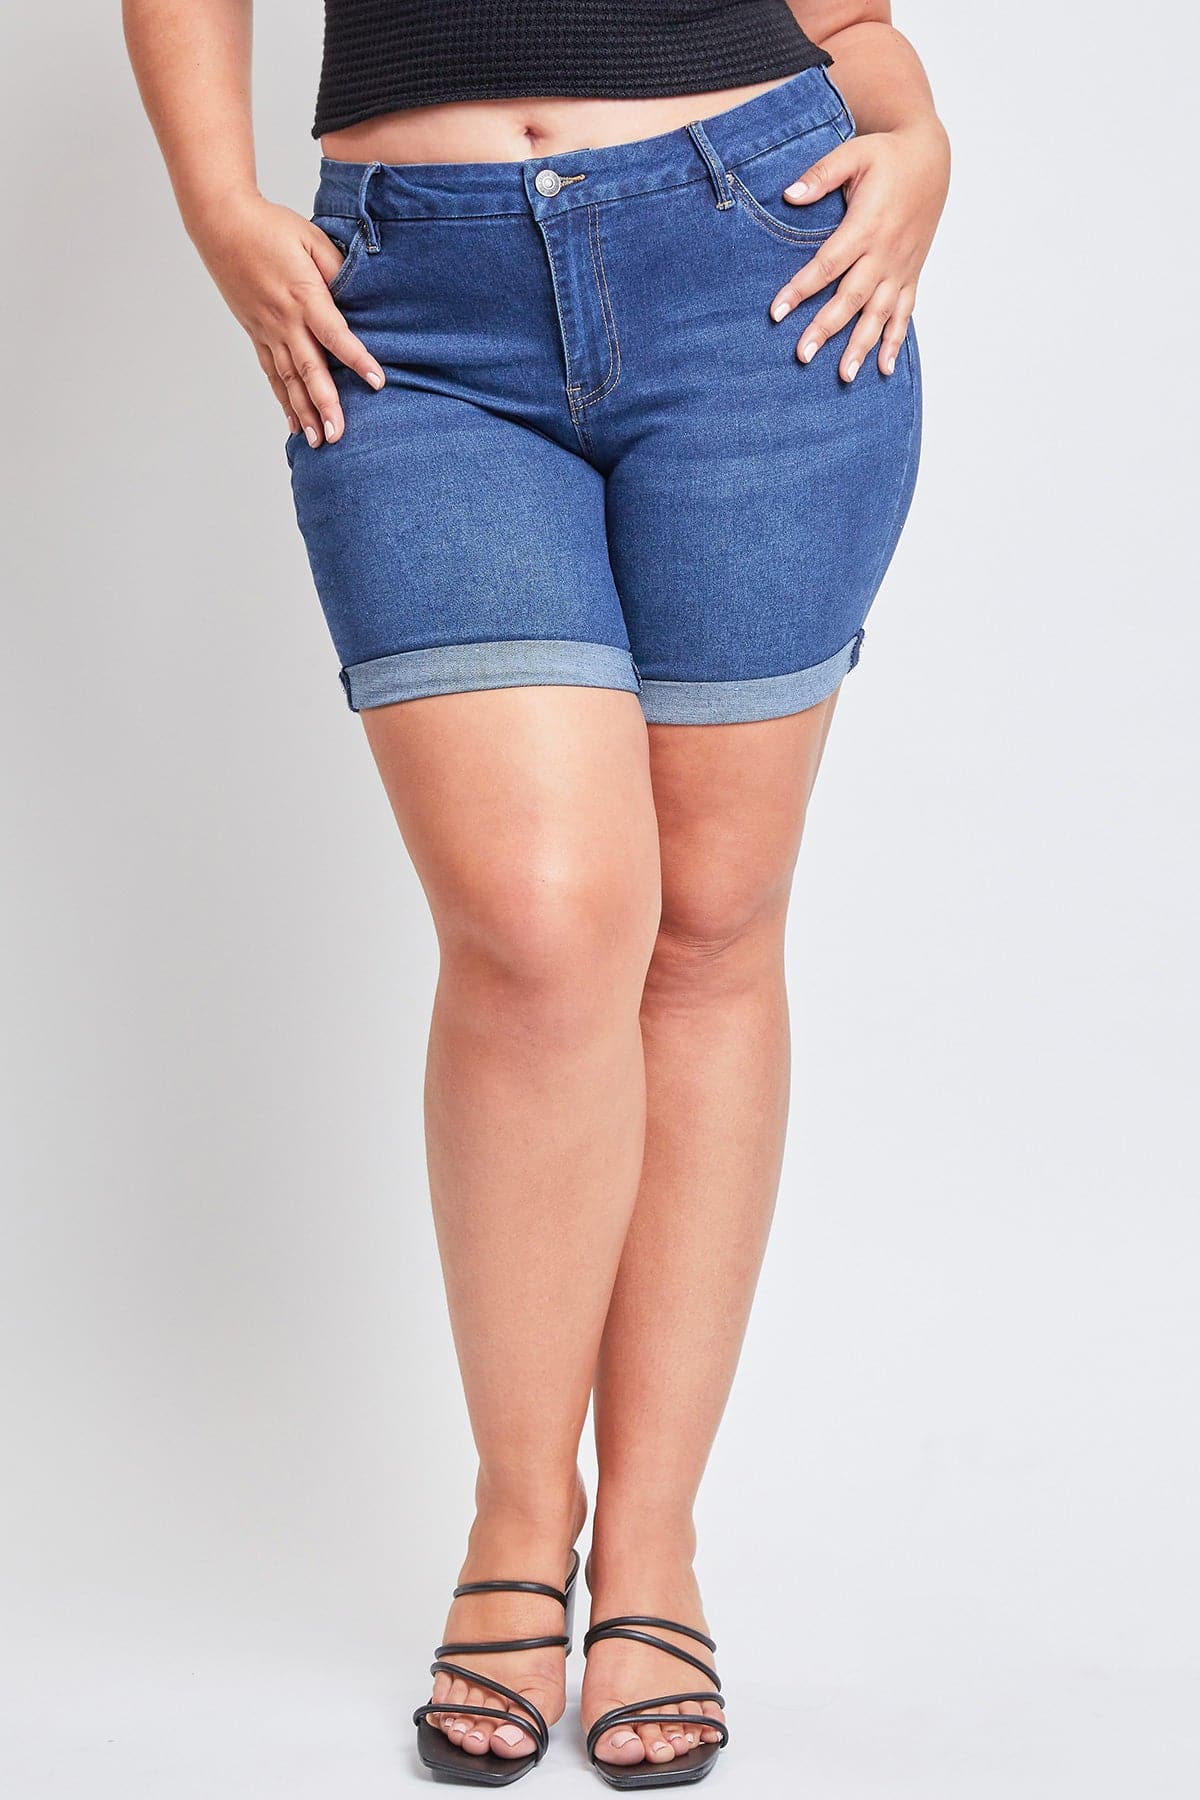 Plus Size Women's Curvy Fit Shorts With Rolled Cuffs from YMI – YMI JEANS